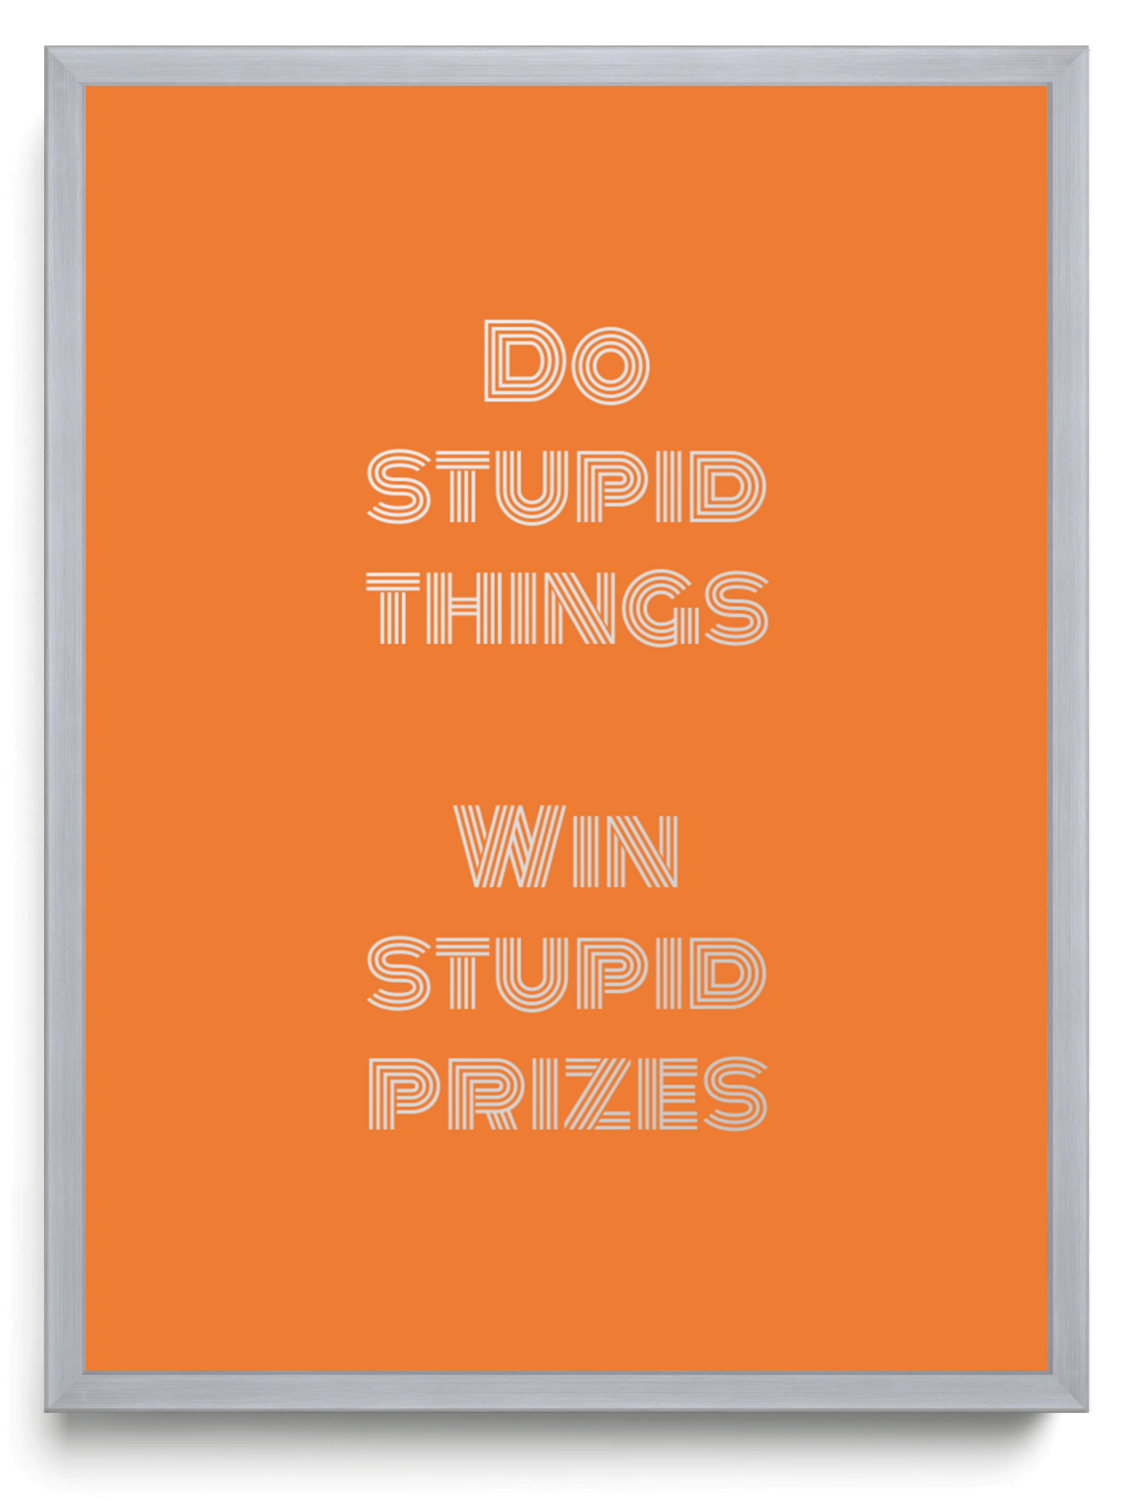 Do stupid things, win stupid prizes